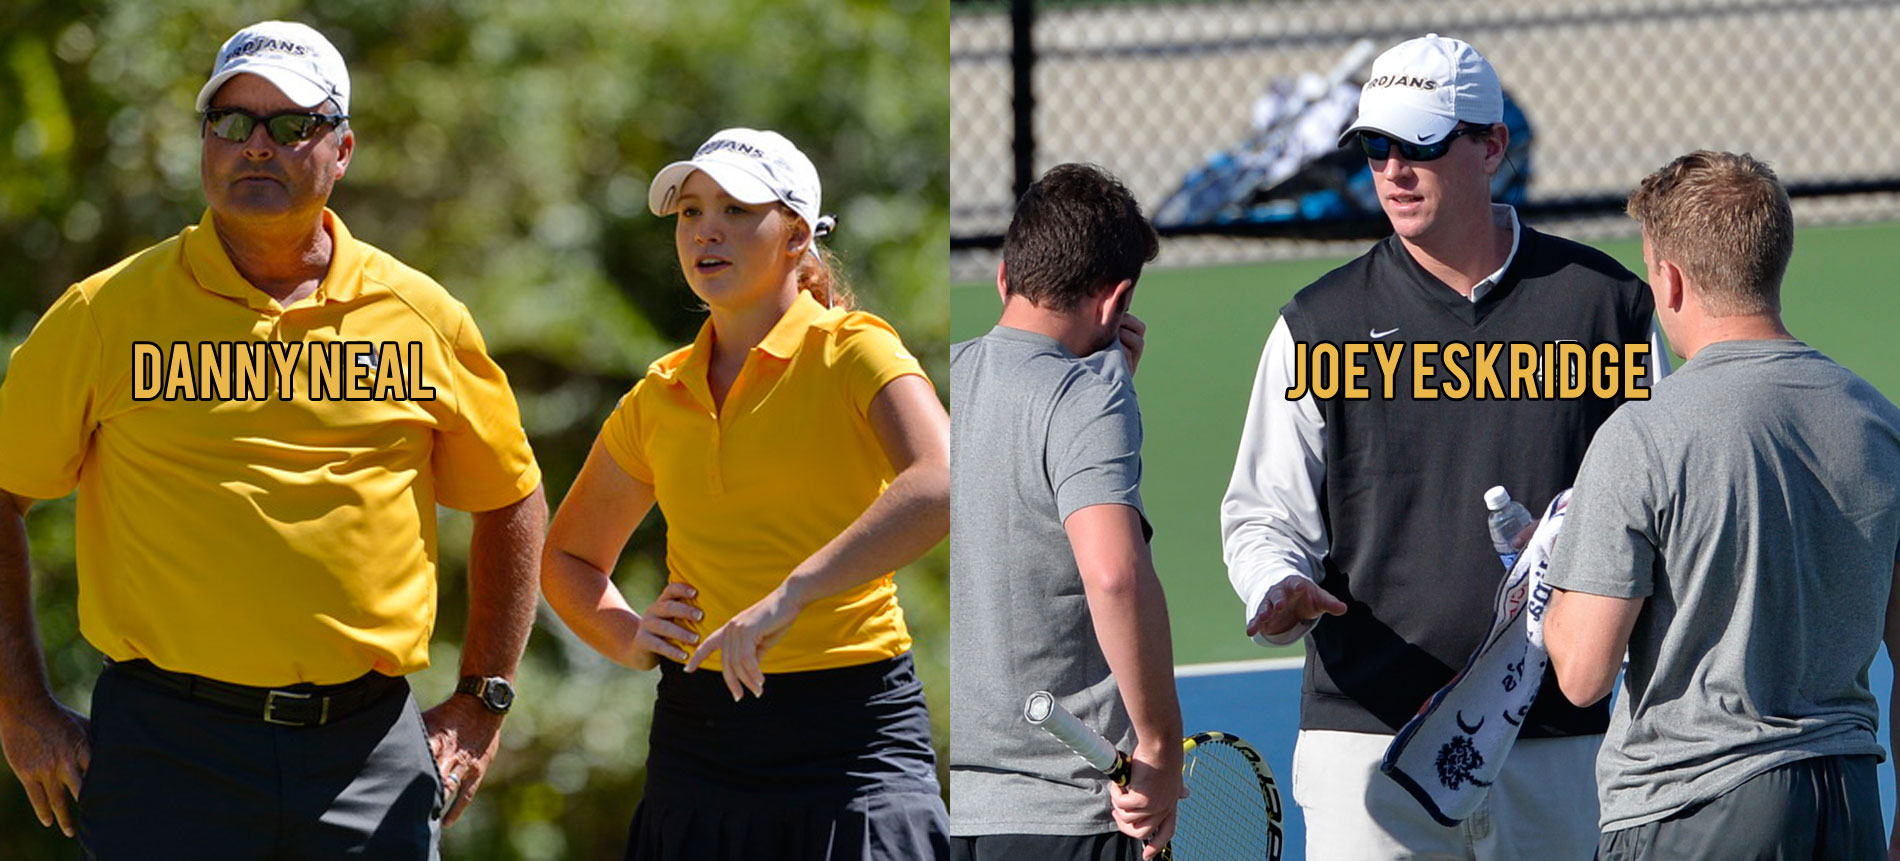 Eskridge Named Director of Tennis; Neal Appointed Director of Golf for the Trojans